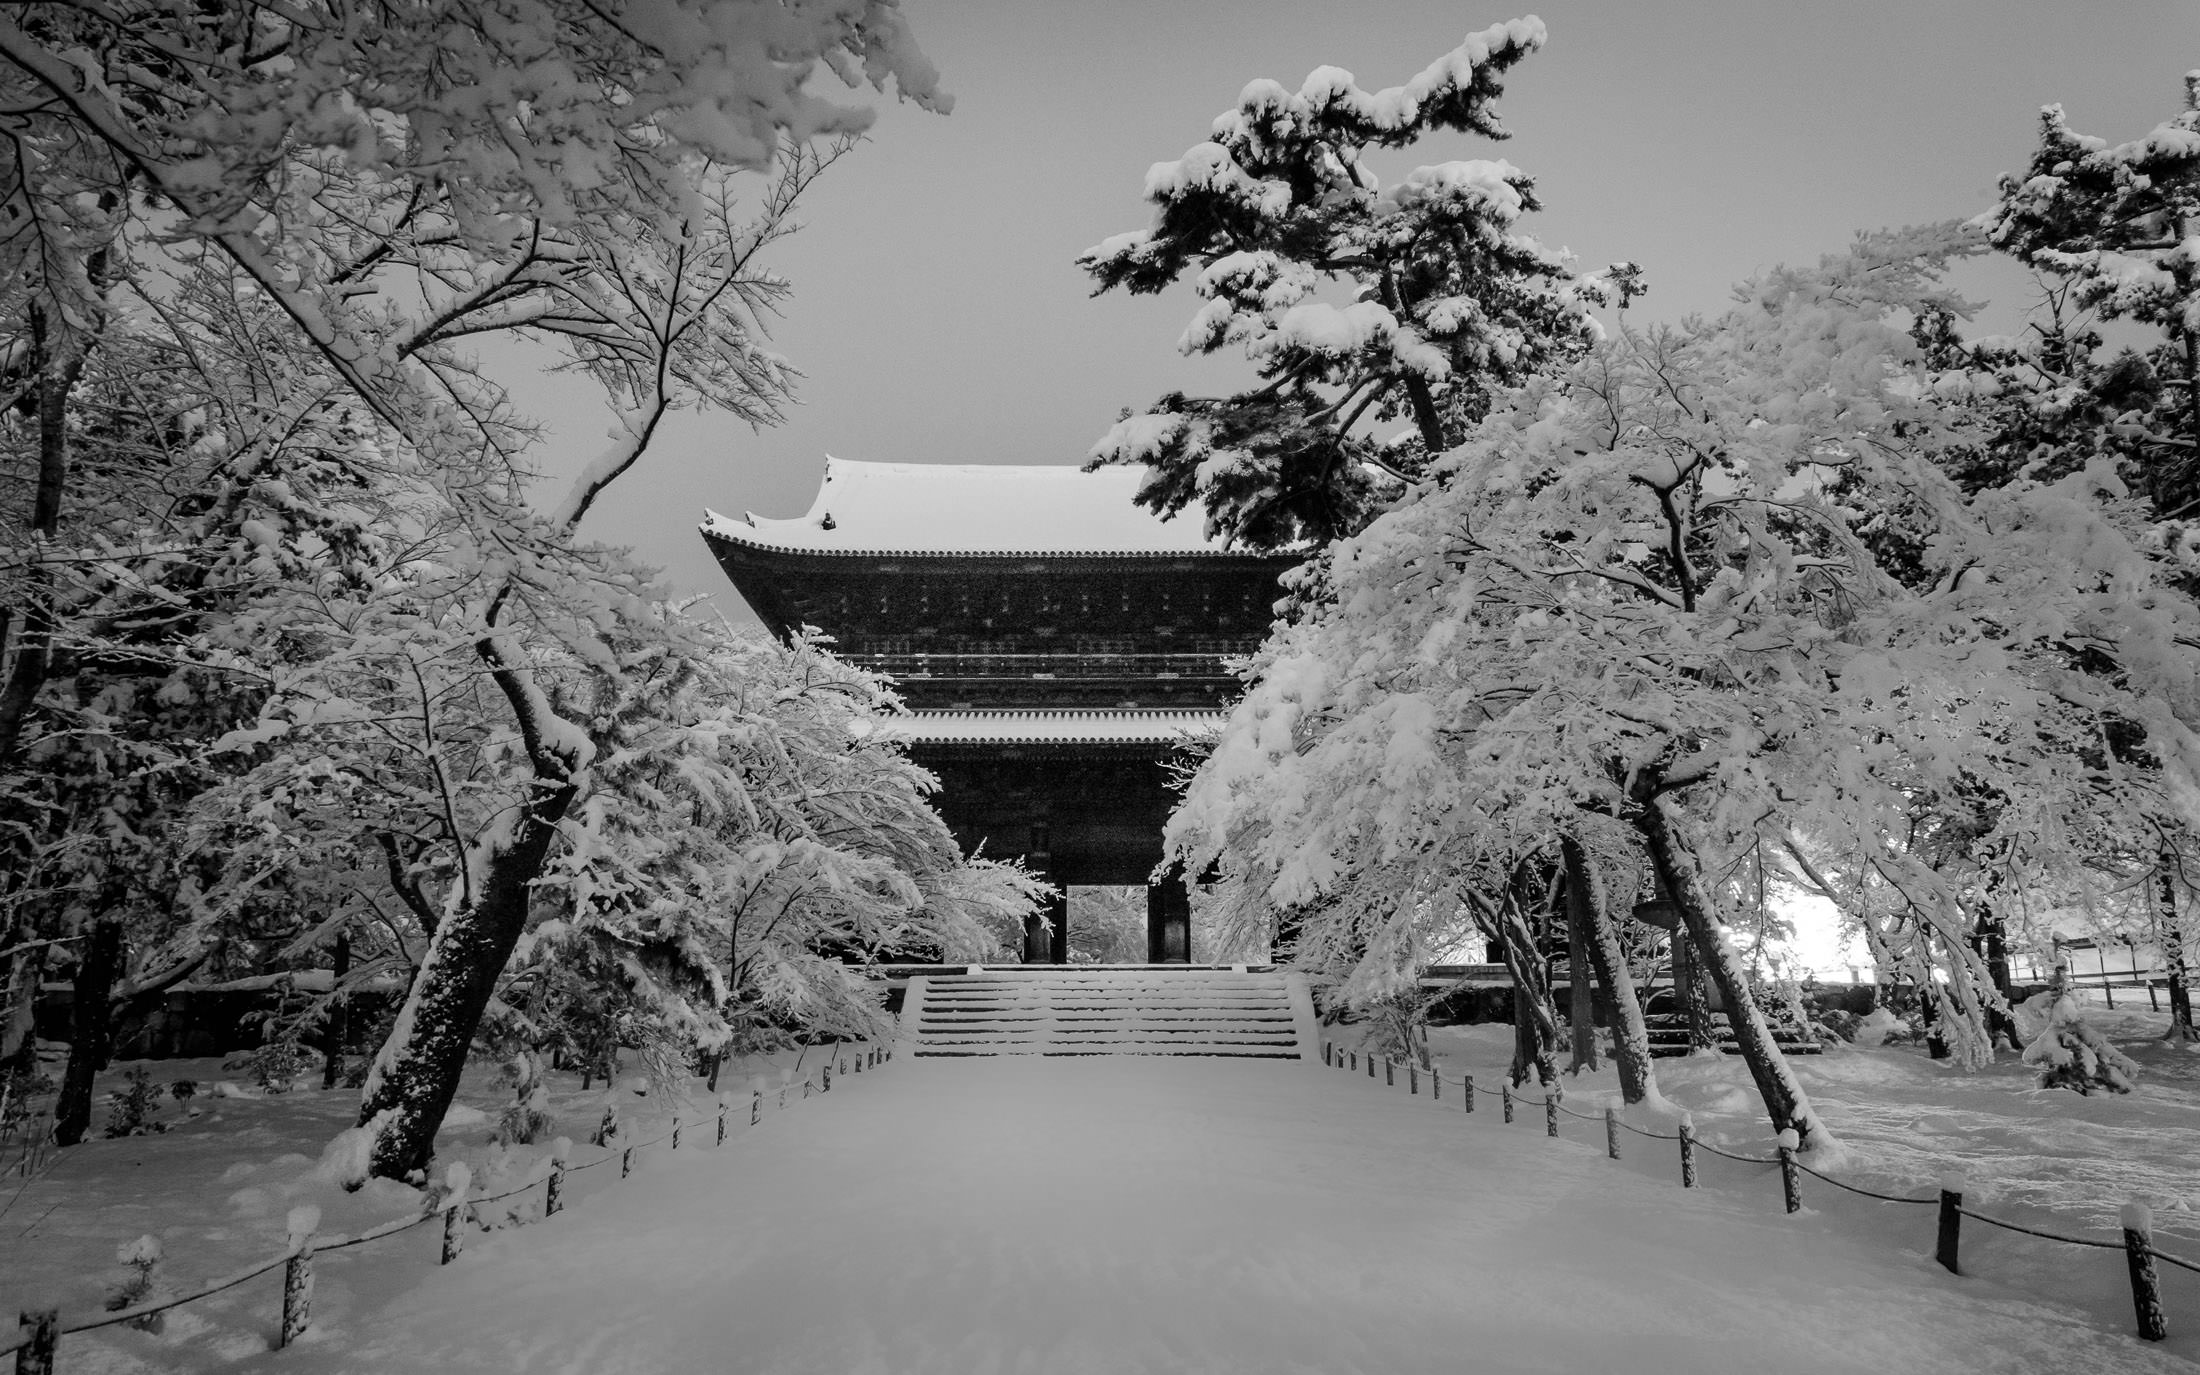 Kyoto At Night During a Heavy Snow